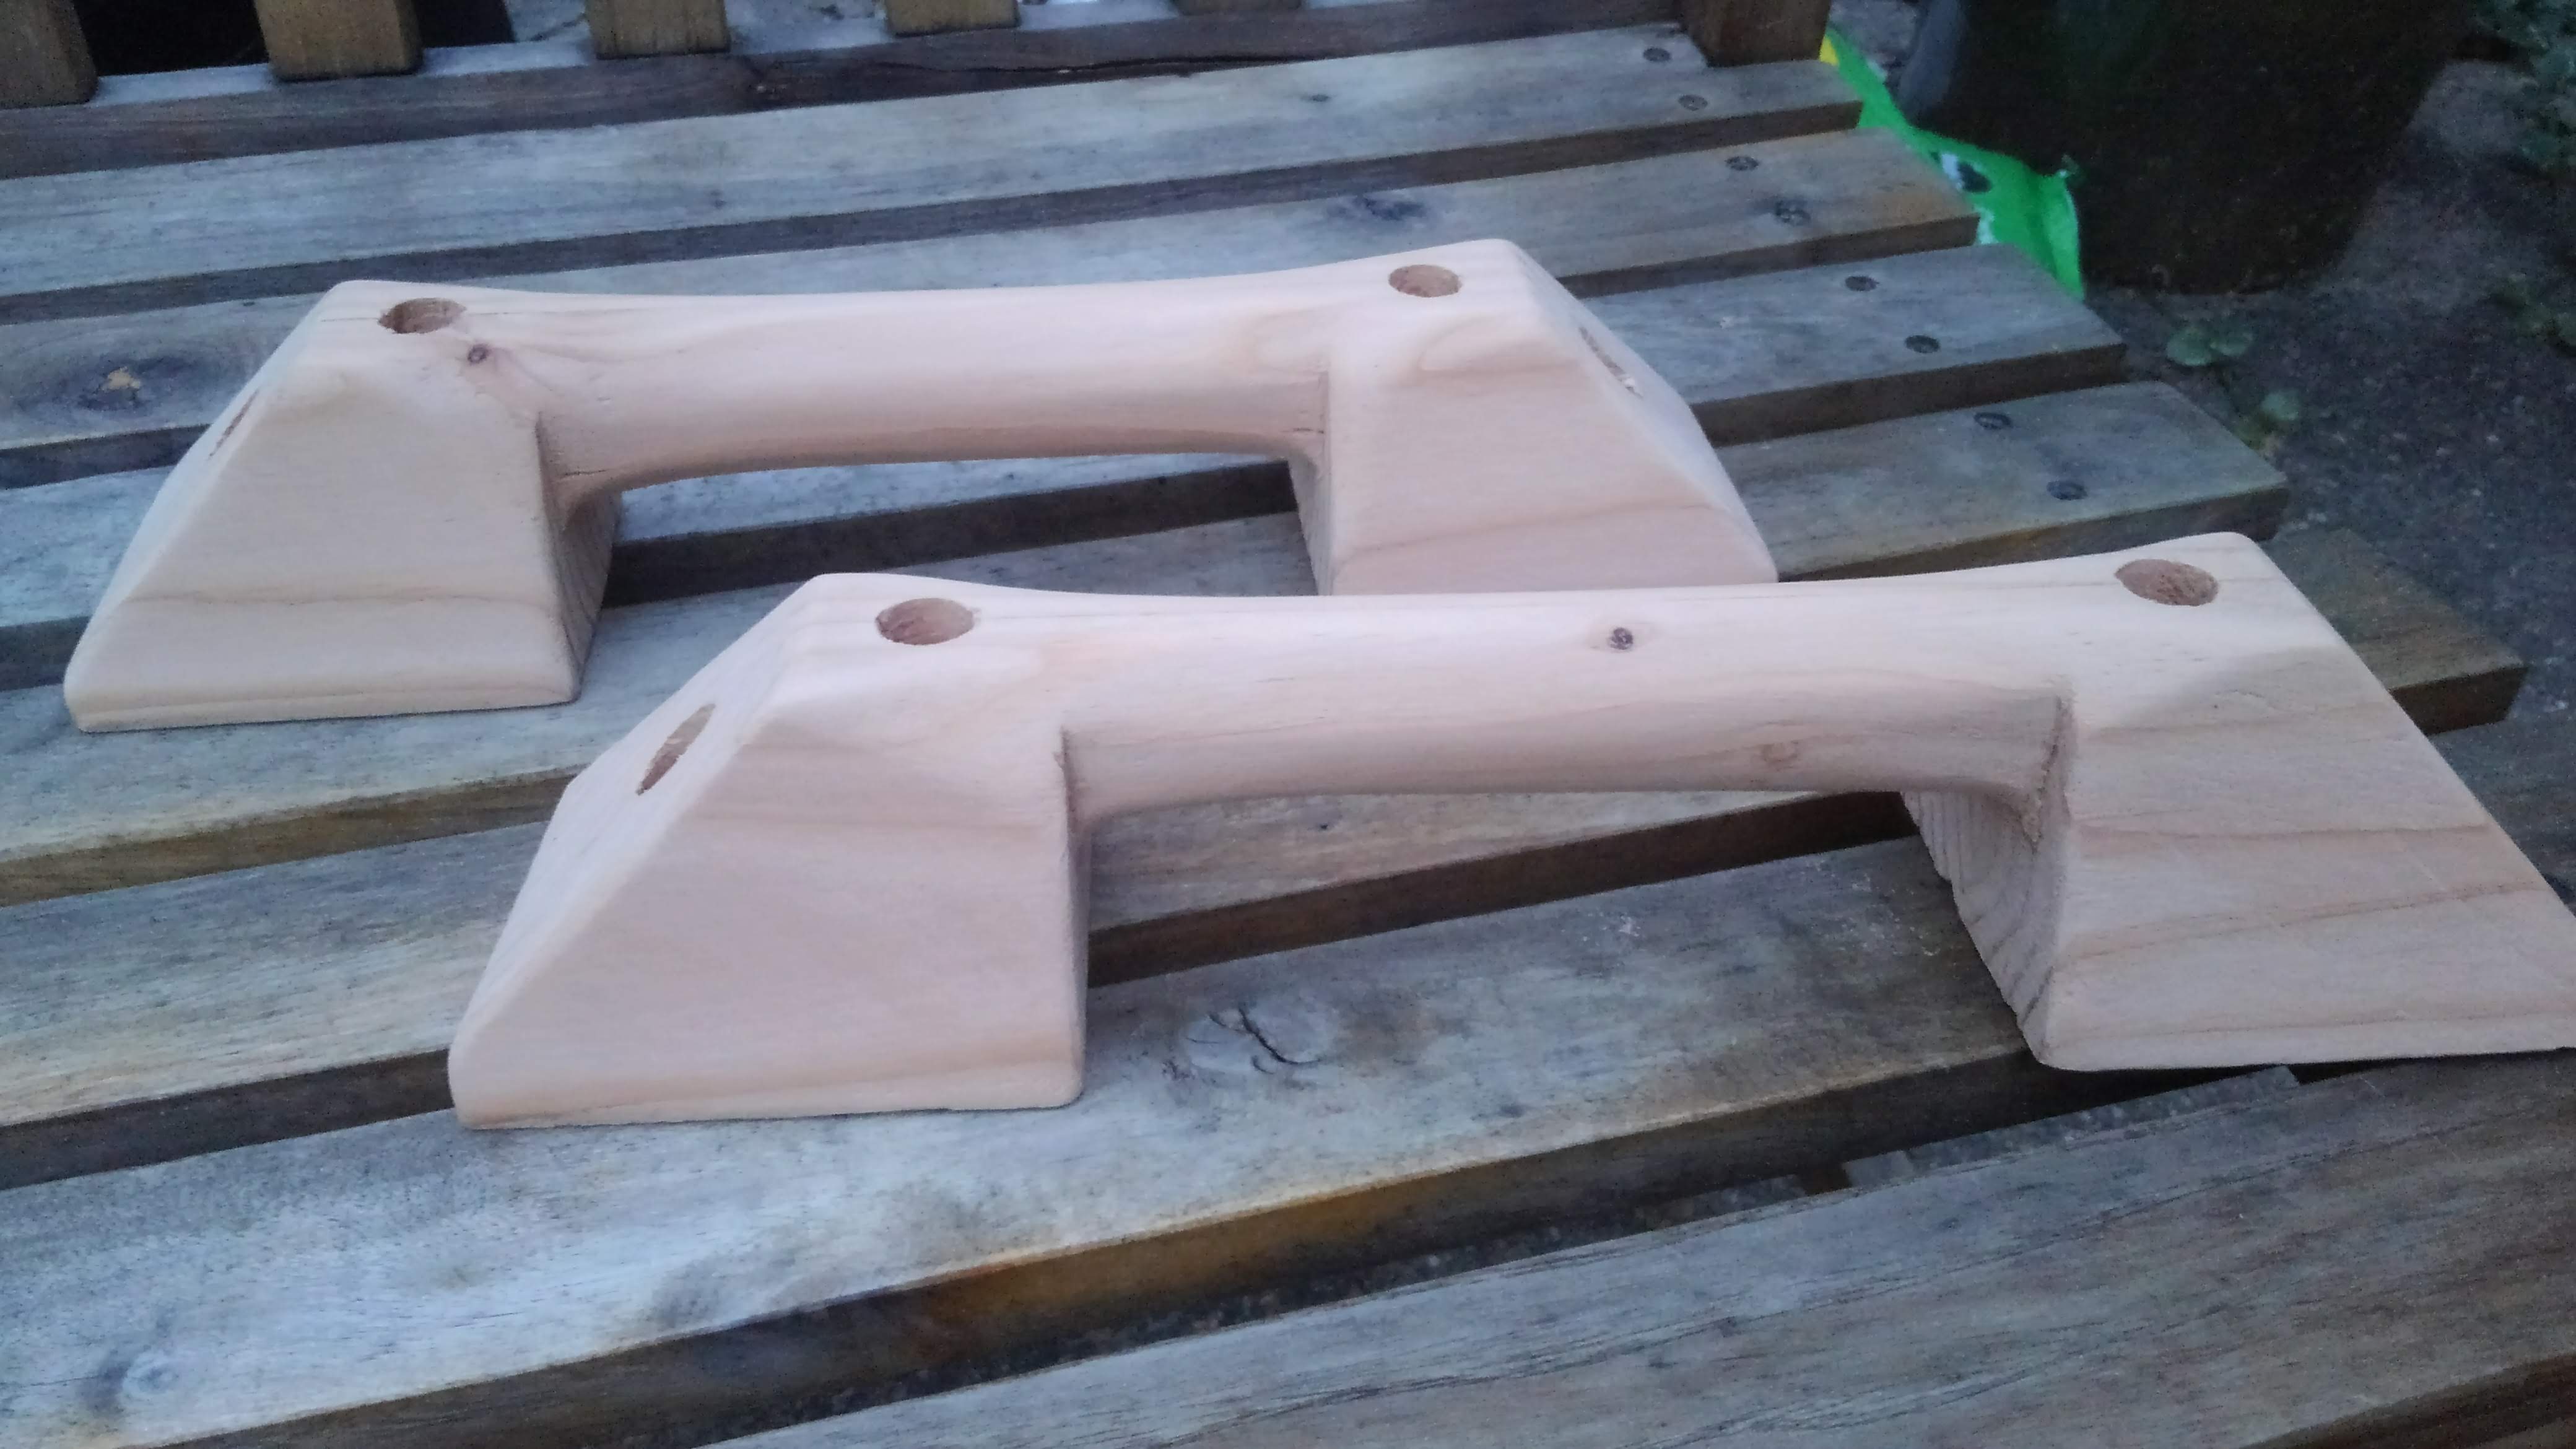 two wooden handles